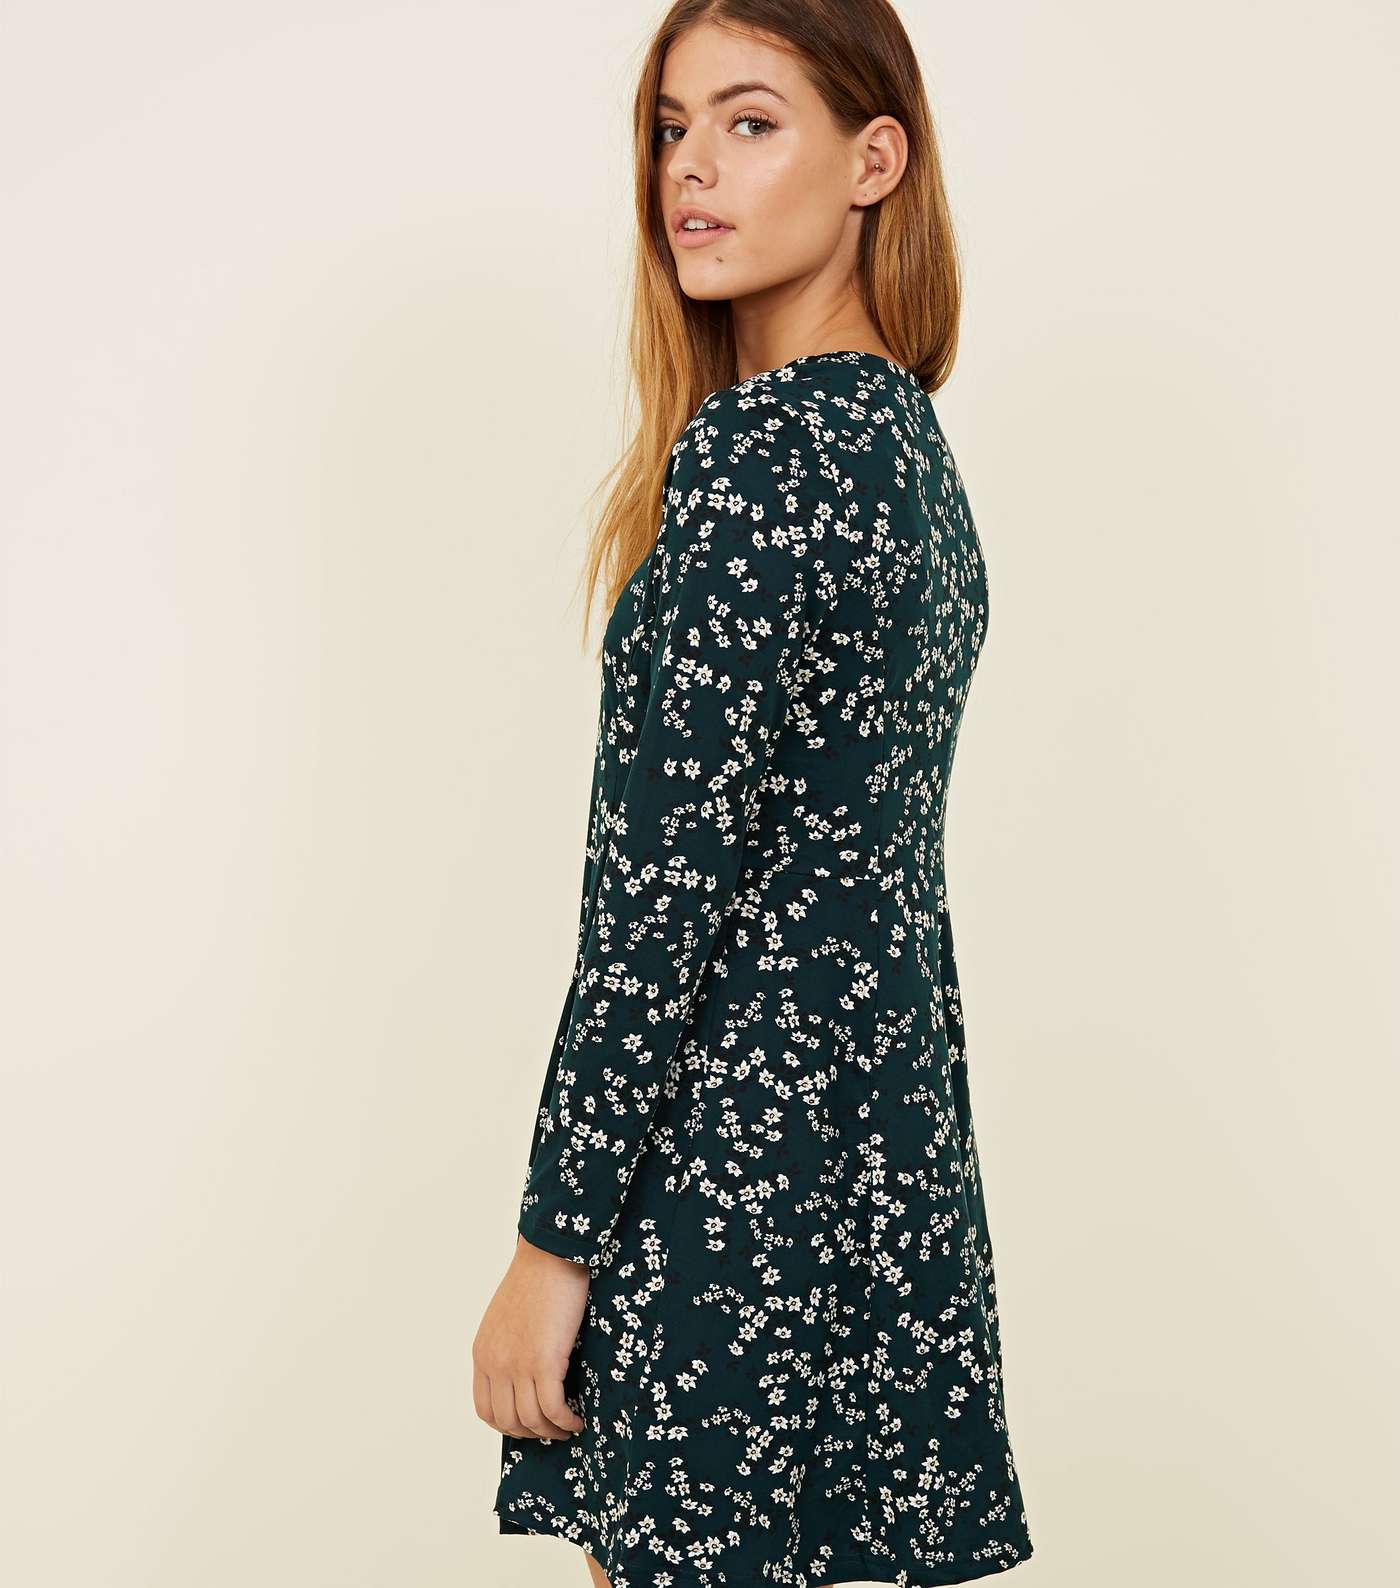 Petite Green Floral Soft Touch Skater Dress  Image 3